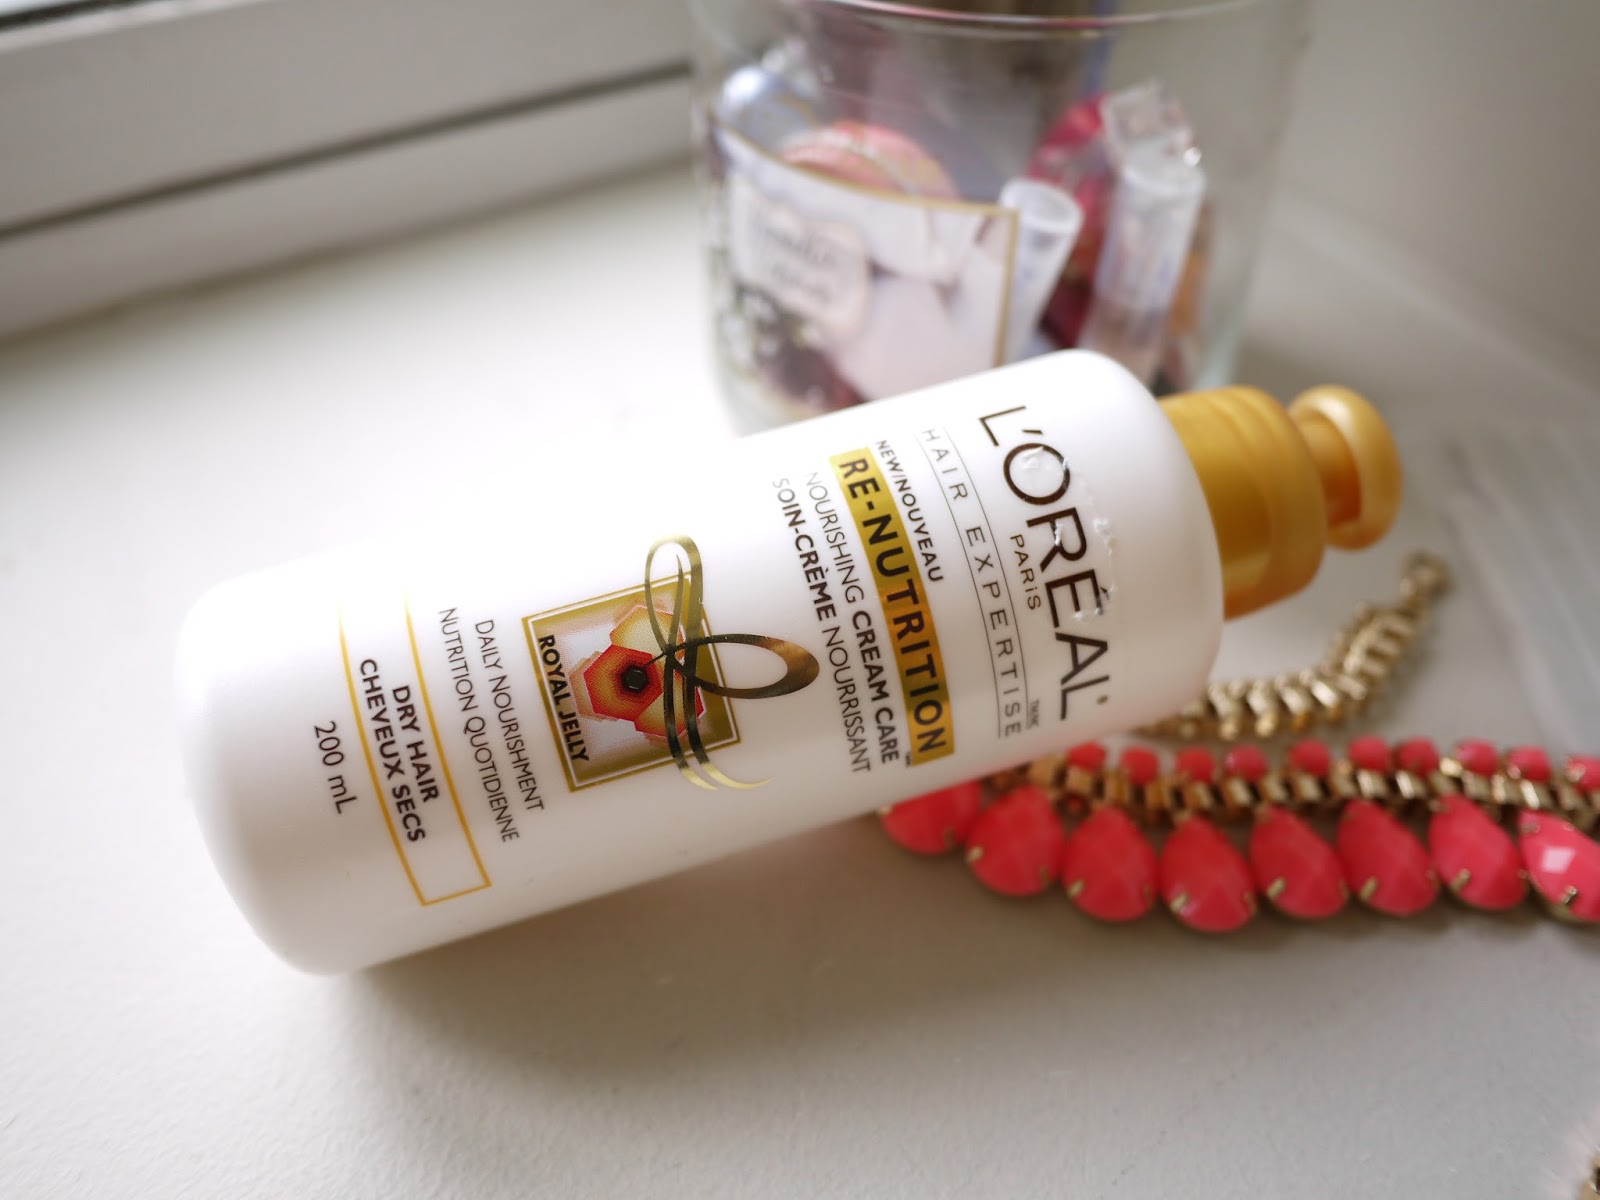 L'Oreal Re-Nutirtion Nourishing Cream Care Royal Jelly review